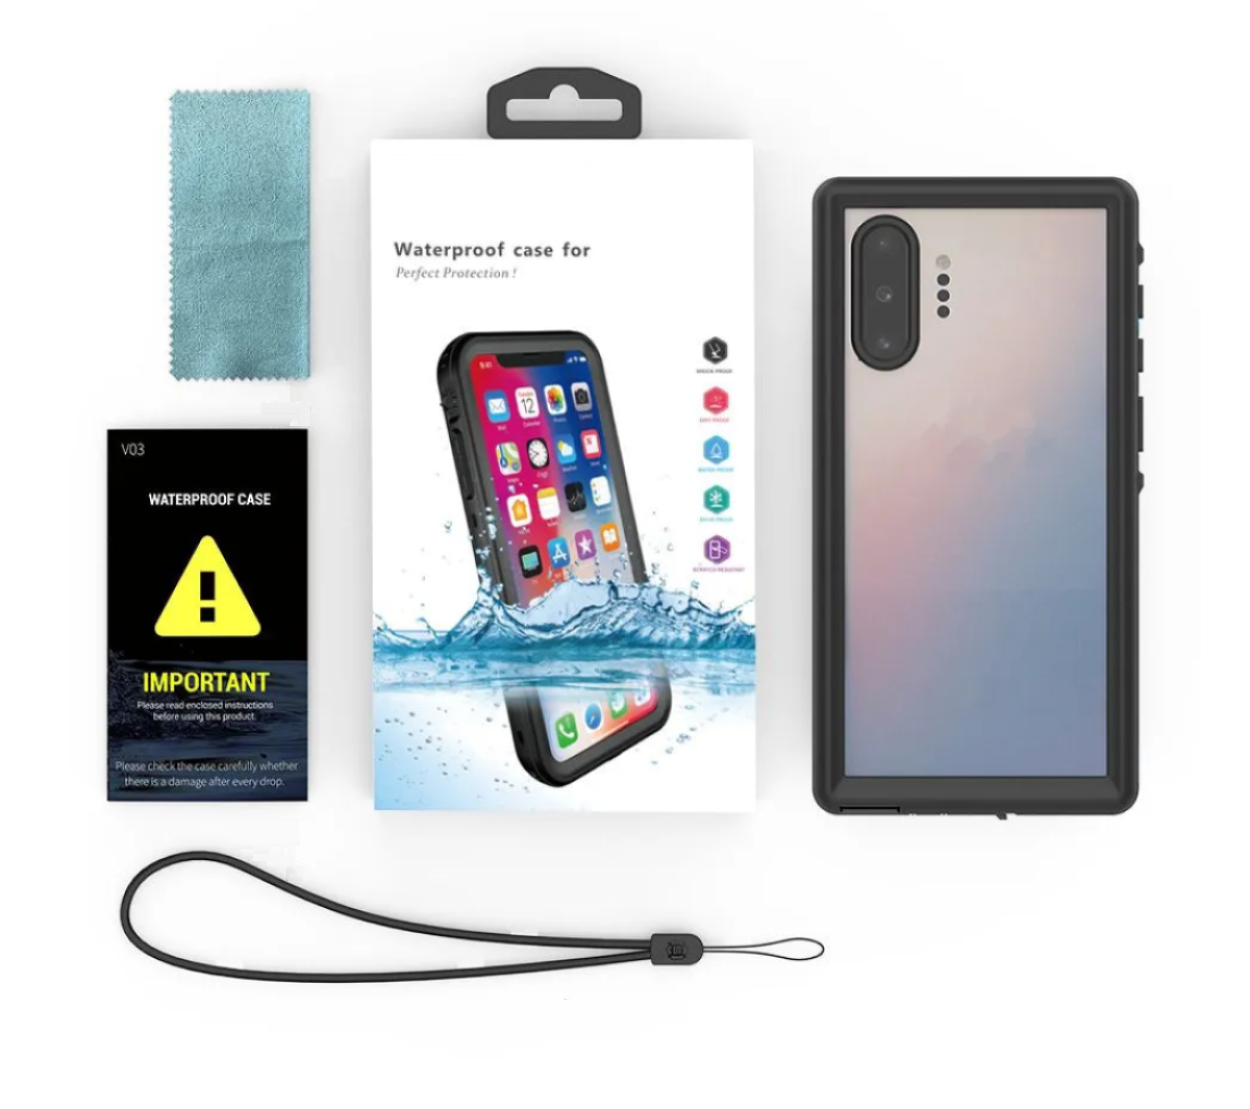 Waterproof Slim Life Proof Case for Samsung Note 10 Built-in Screen Protector Shockproof Dustproof Heavy Duty Full Body Protective Case